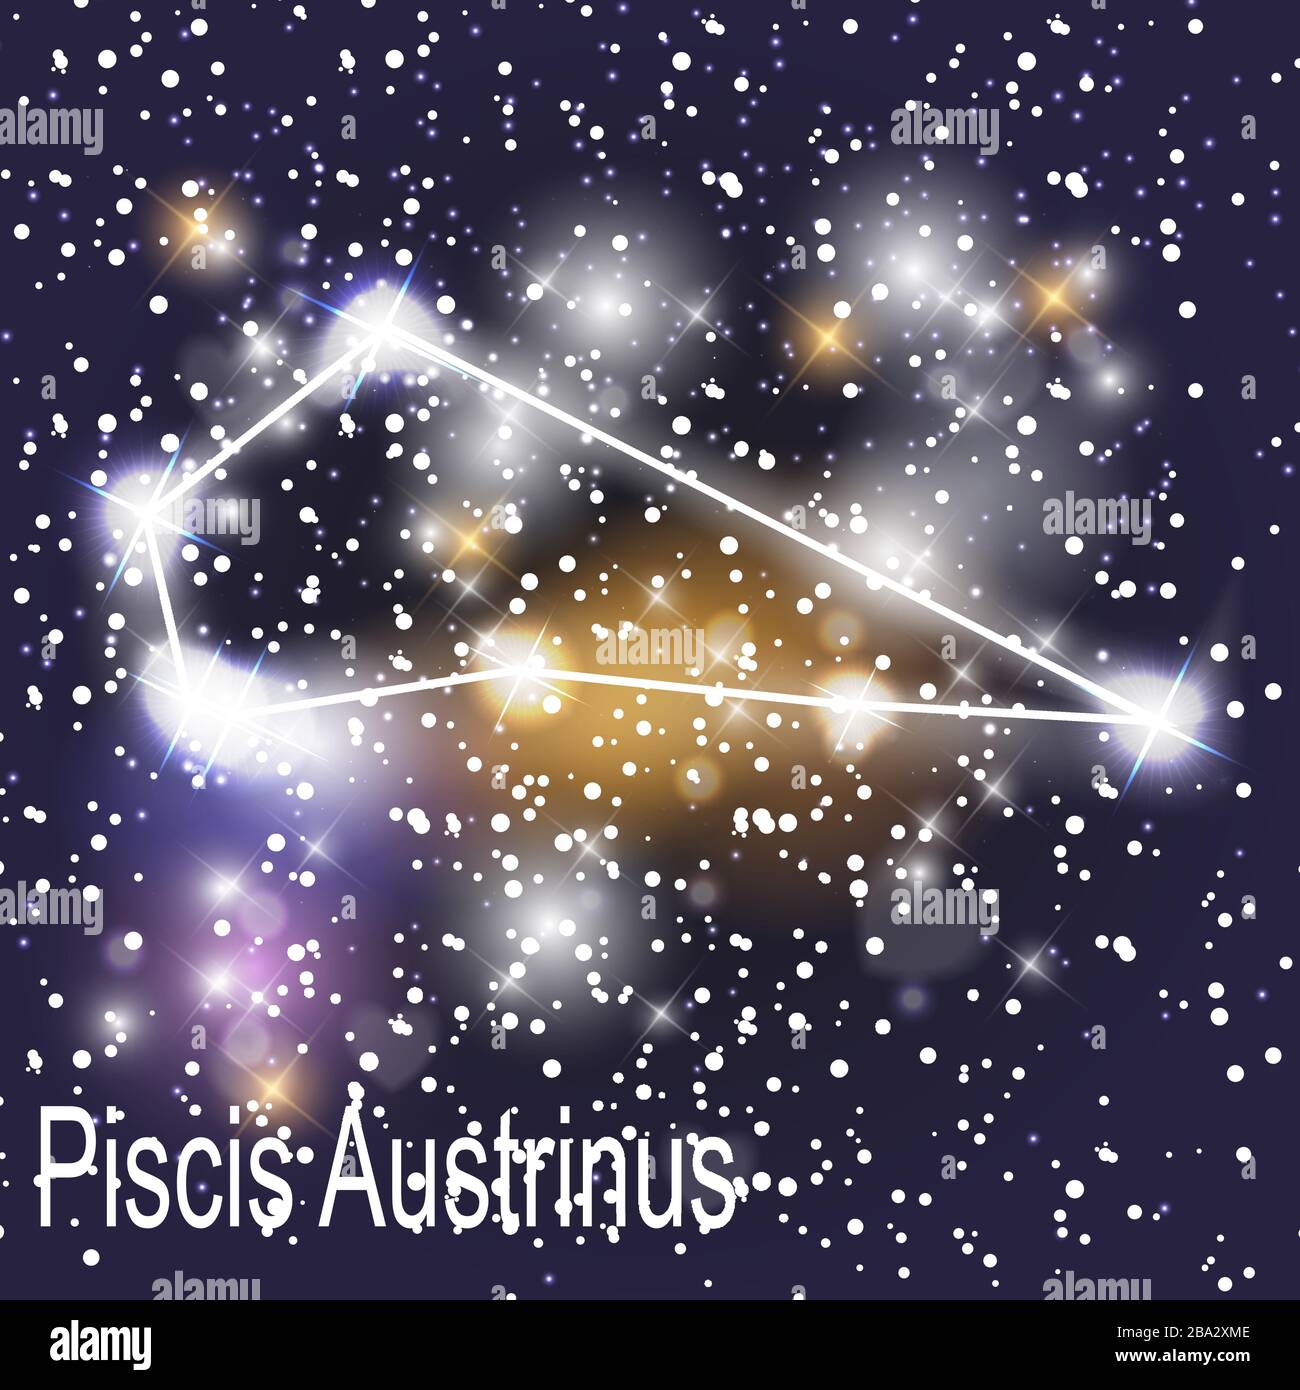 Piscis Austrinus Constellation with Beautiful Bright Stars on the Background of Cosmic Sky Vector Illustration. EPS10 Stock Vector